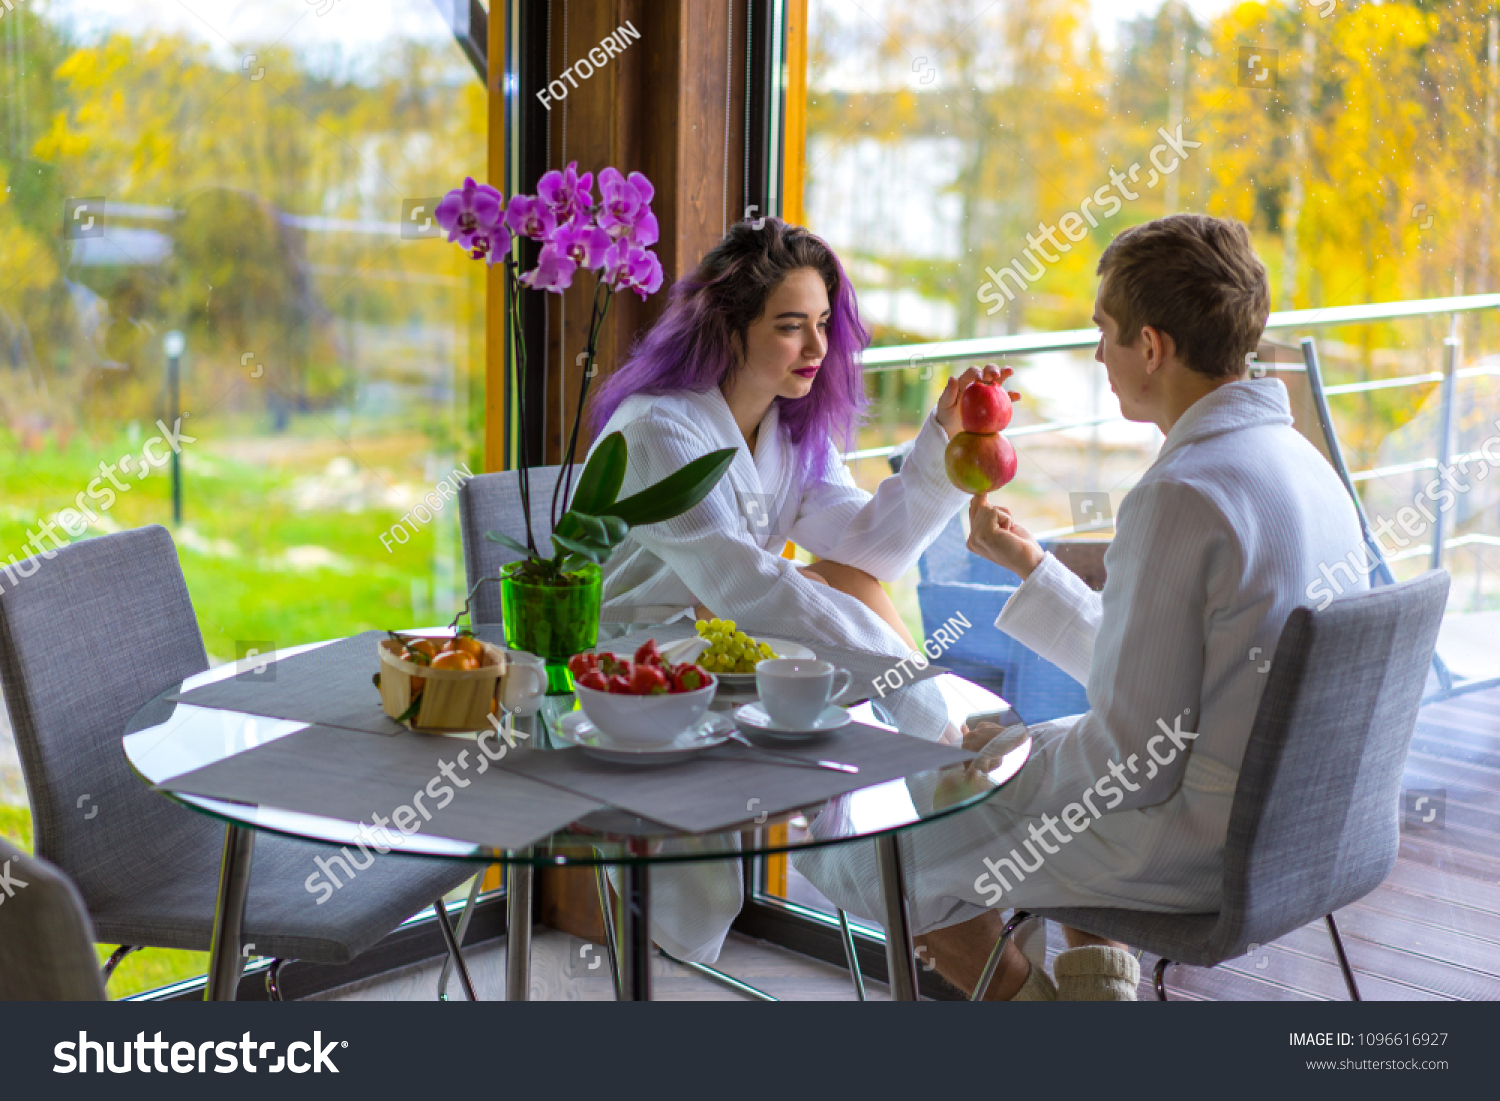 Girl Guy Sitting By Fireplace Loving Stock Photo Edit Now 1096616927